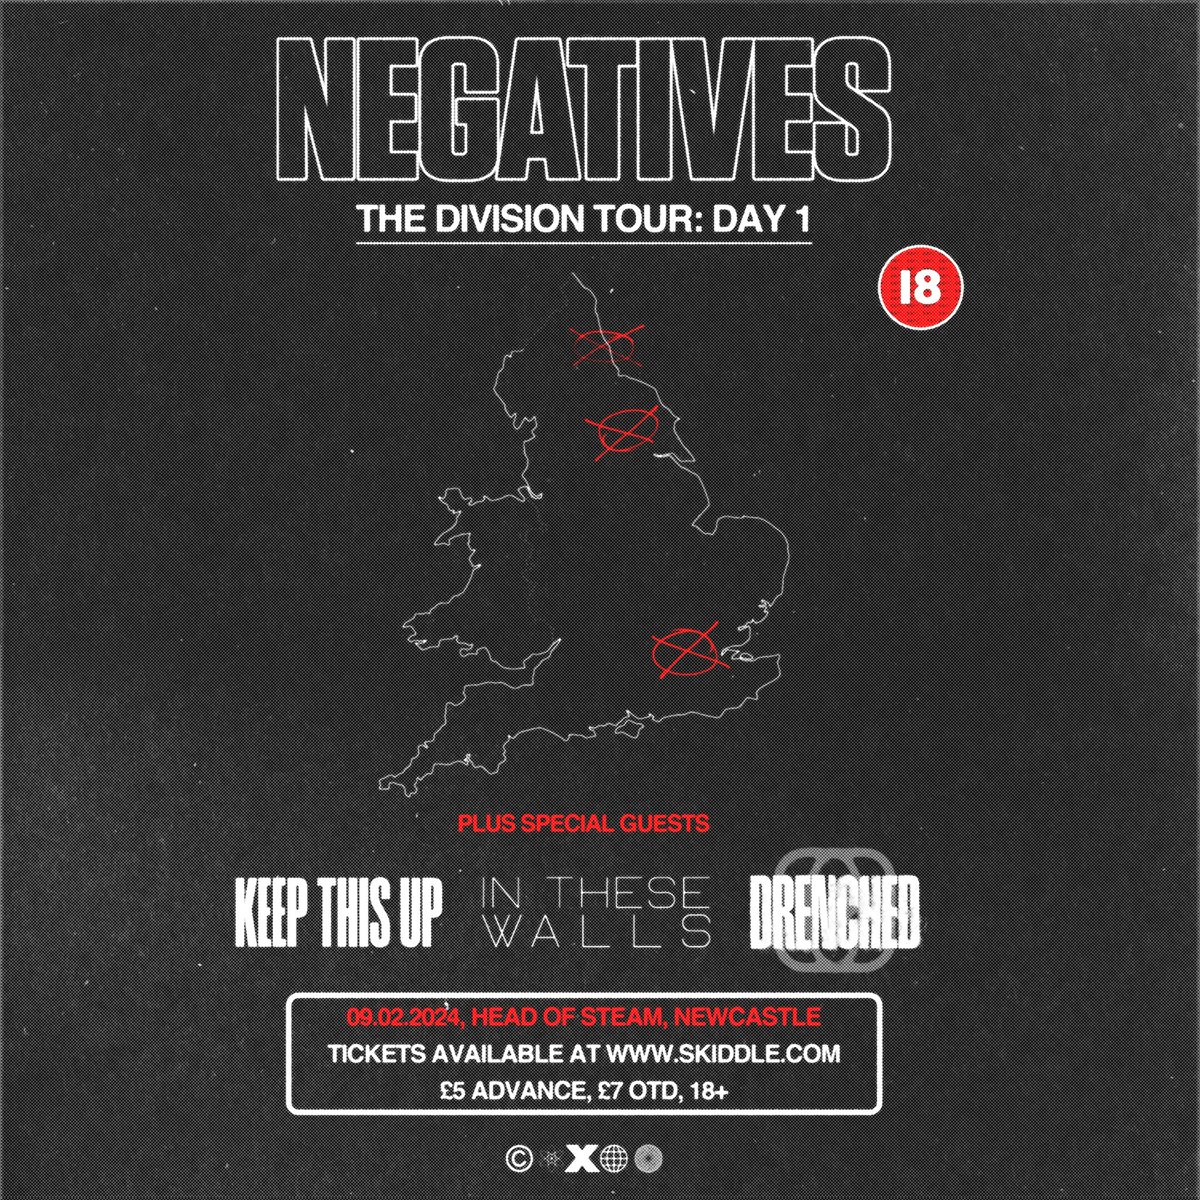 Day 1 of the Division Tour starts today! Don't miss out ❌ linktr.ee/divisiontour